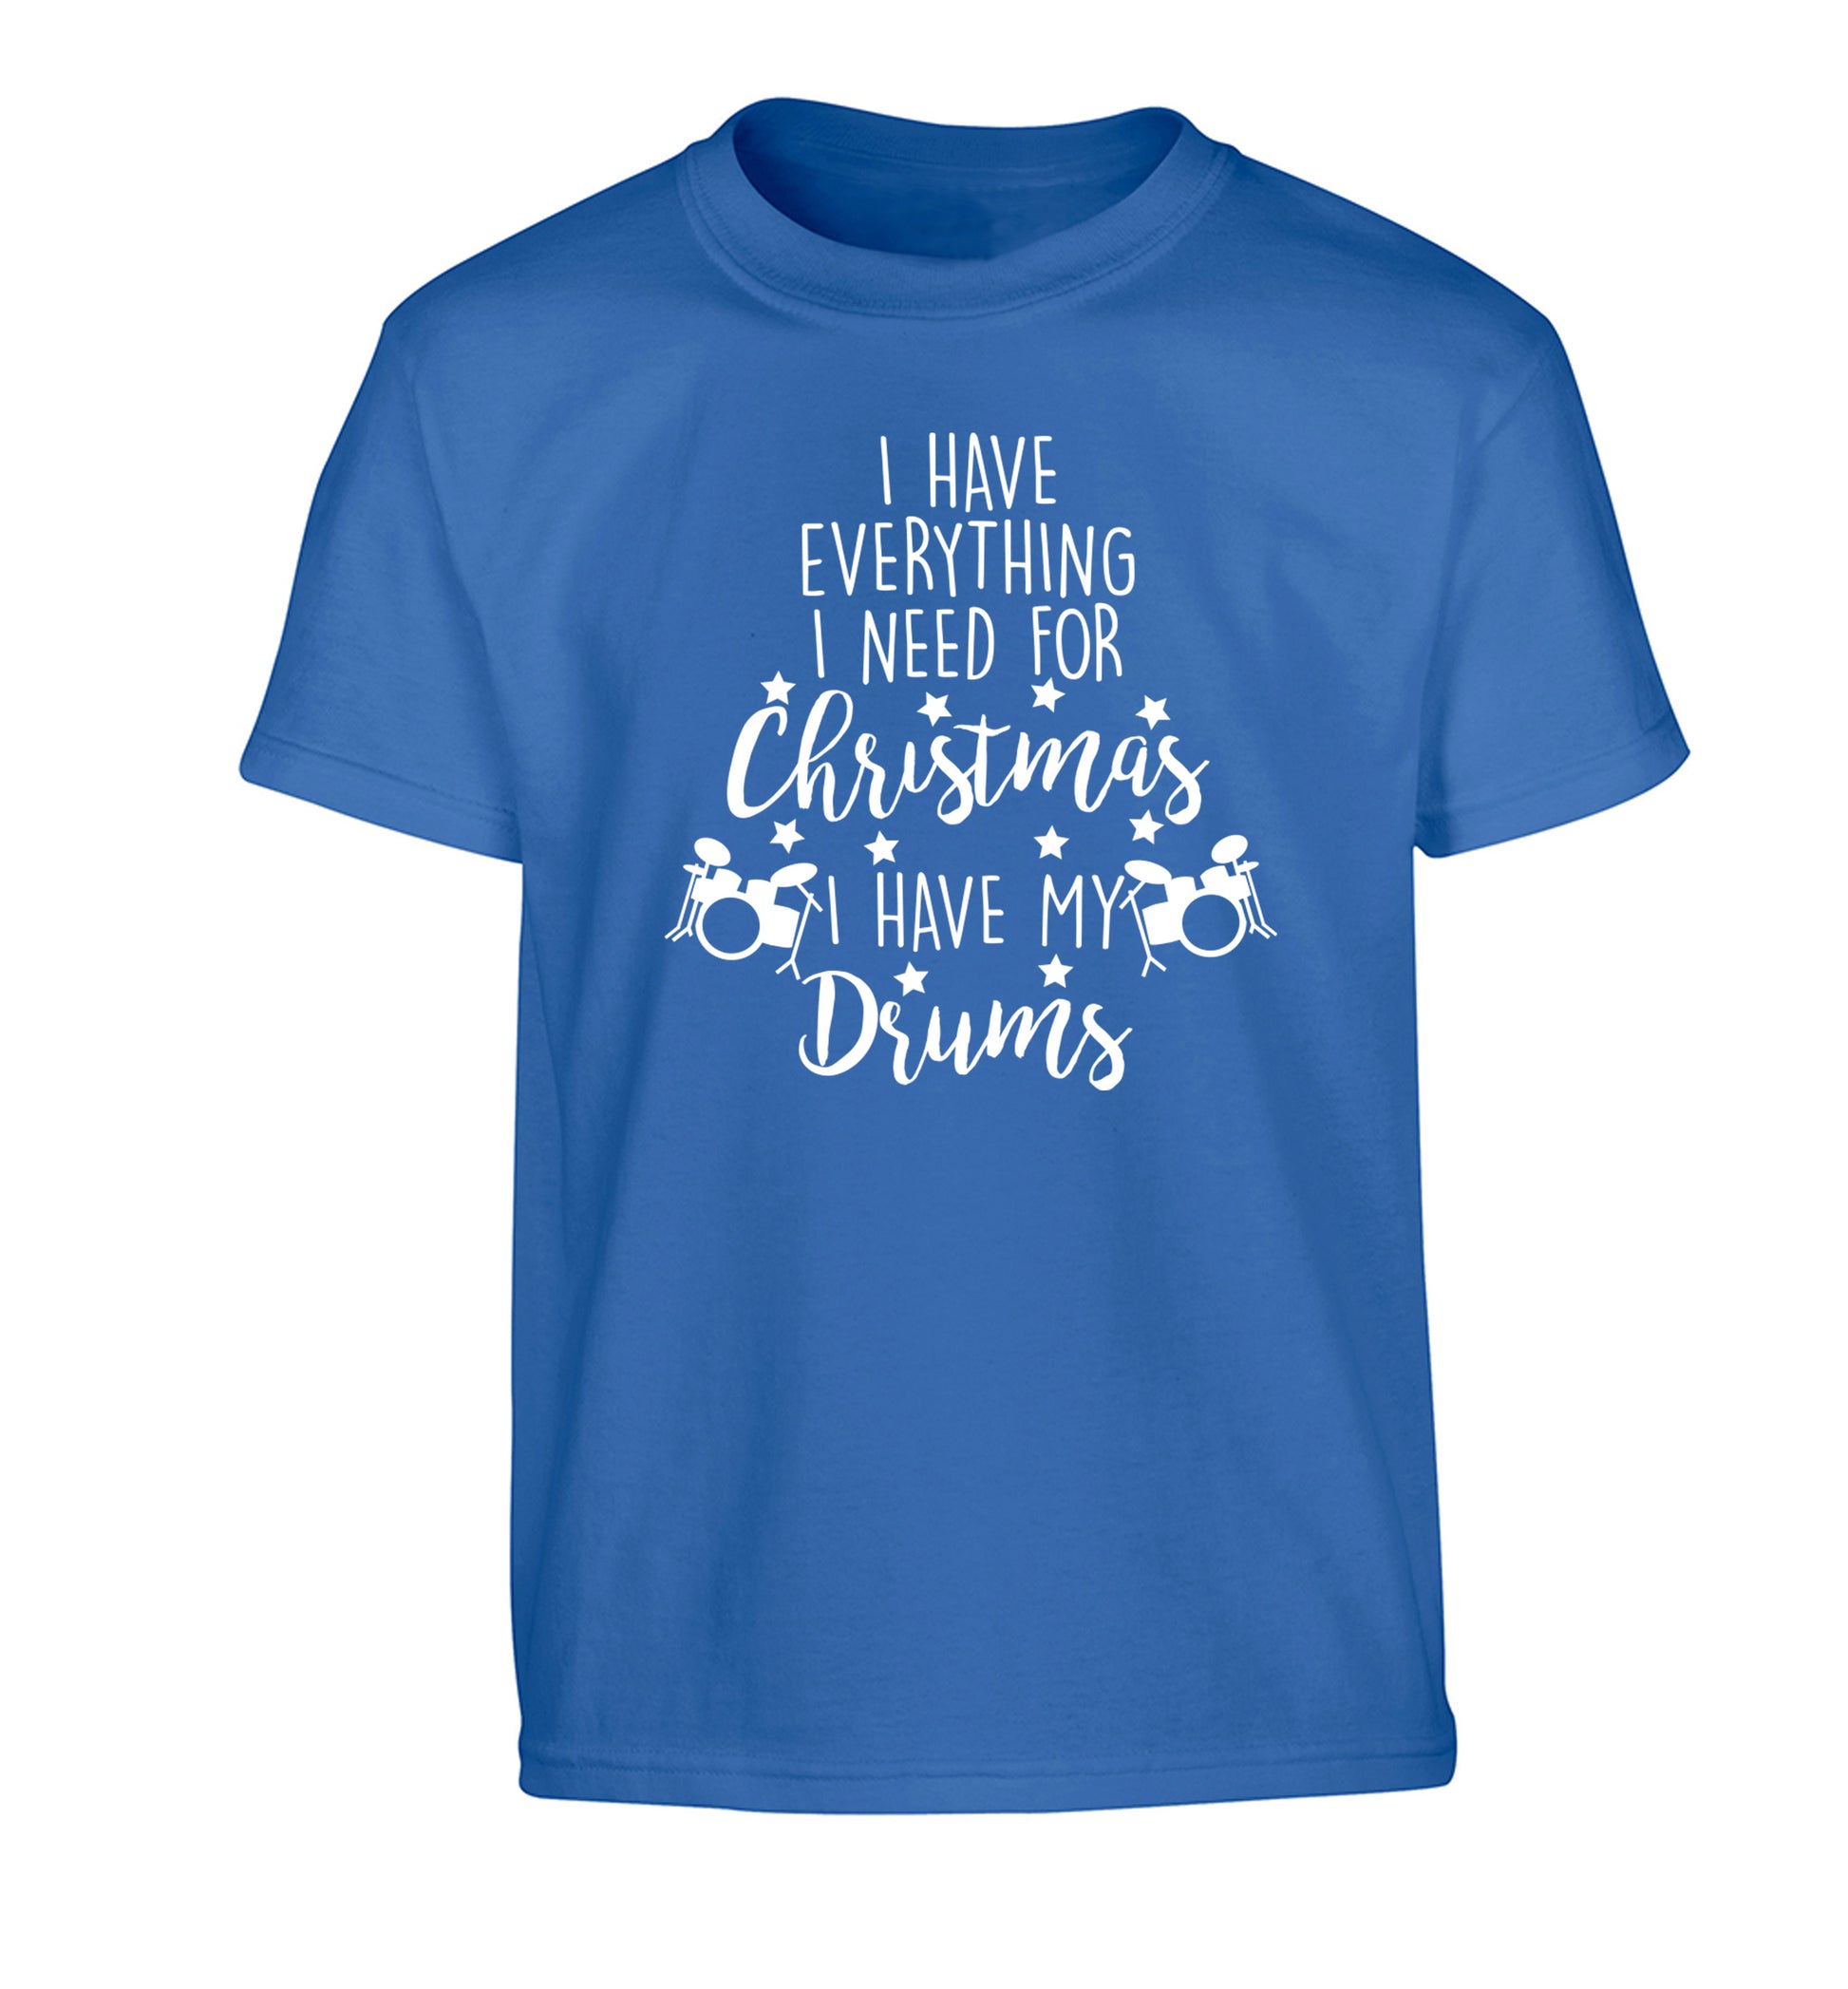 I have everything I need for Christmas I have my drums! Children's blue Tshirt 12-14 Years